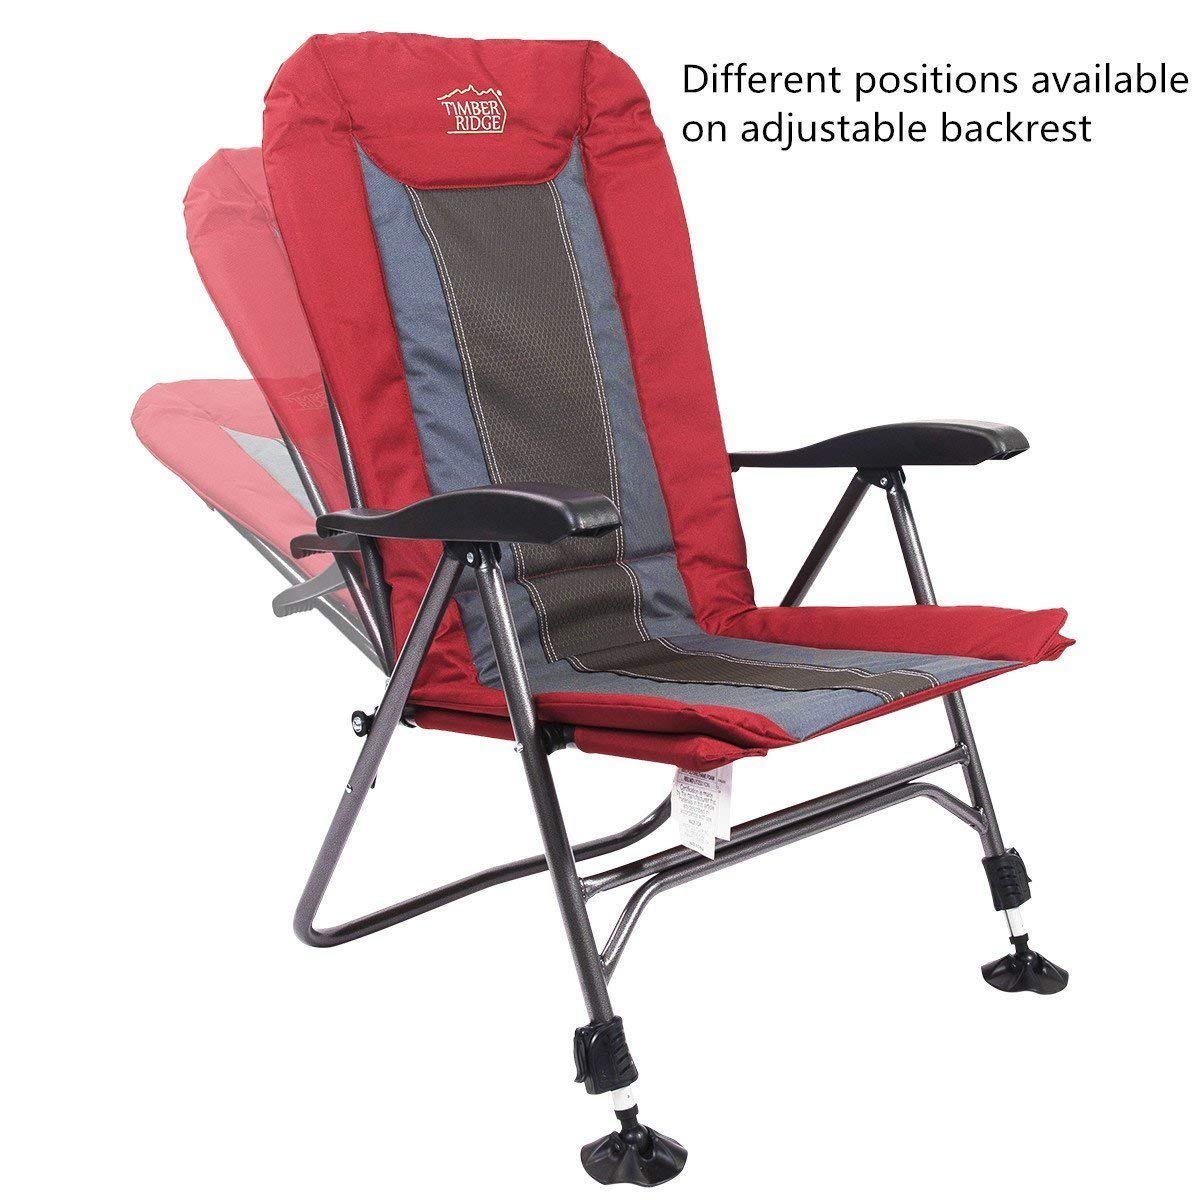 Timber Ridge Camping Chair Folding Heavy Duty With Adjustable